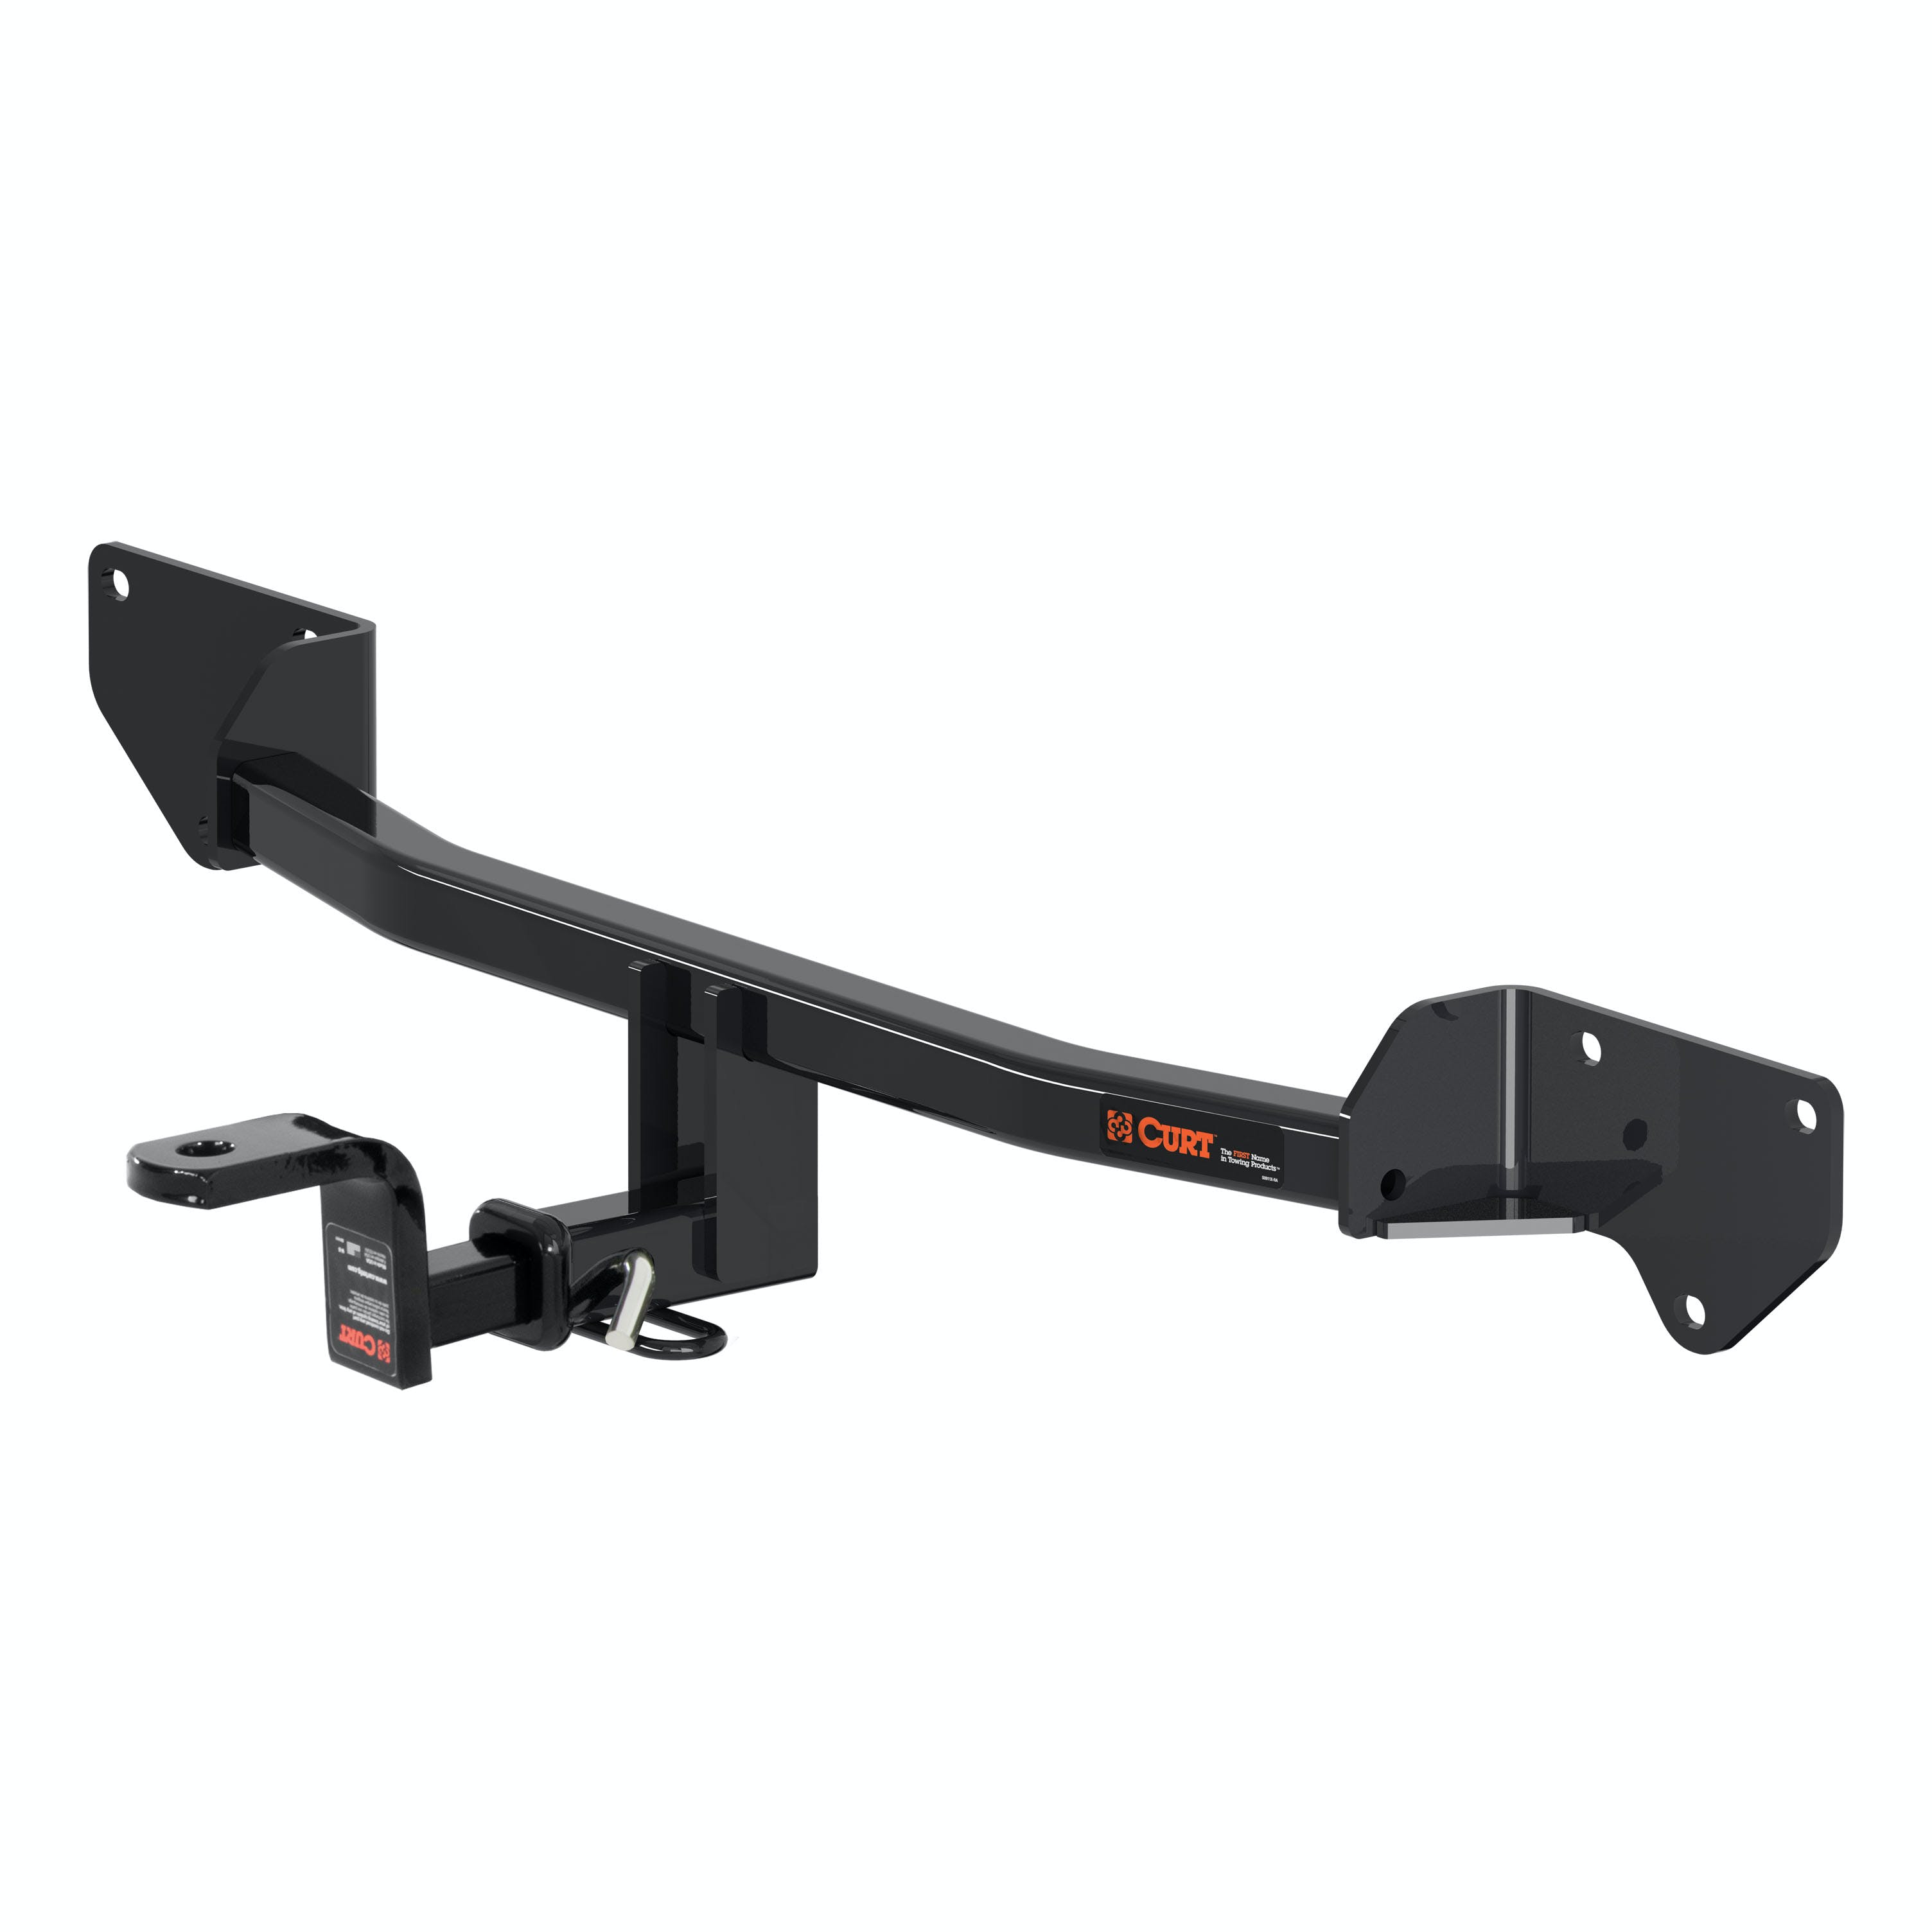 CURT 115233 Class 1 Trailer Hitch, 1-1/4 Ball Mount, Select Toyota Prius C